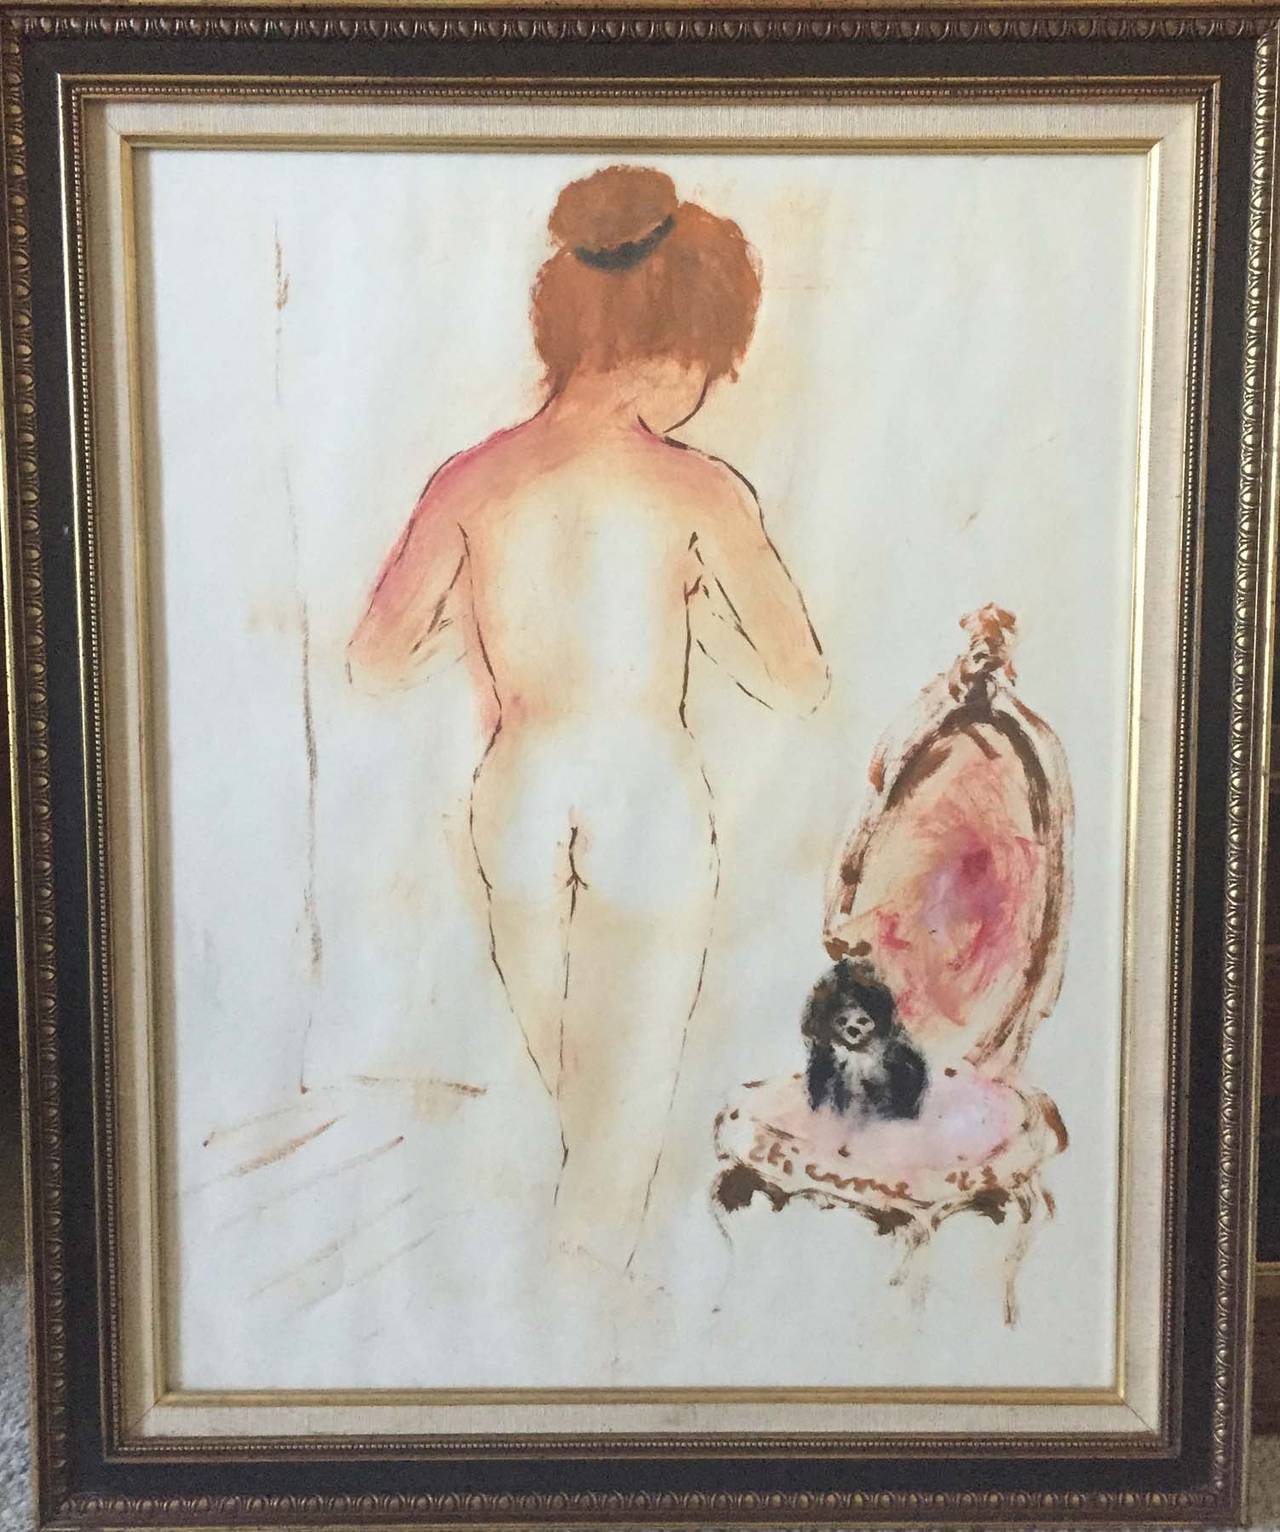 Rogen Etienne
Born 1922

Framed in original frames. 28 x 23 Inches including the frames.

Etienne was born in Paris in 1922 and as far as I know is still living in Southern California. He is a well listed and popular French impressionist who